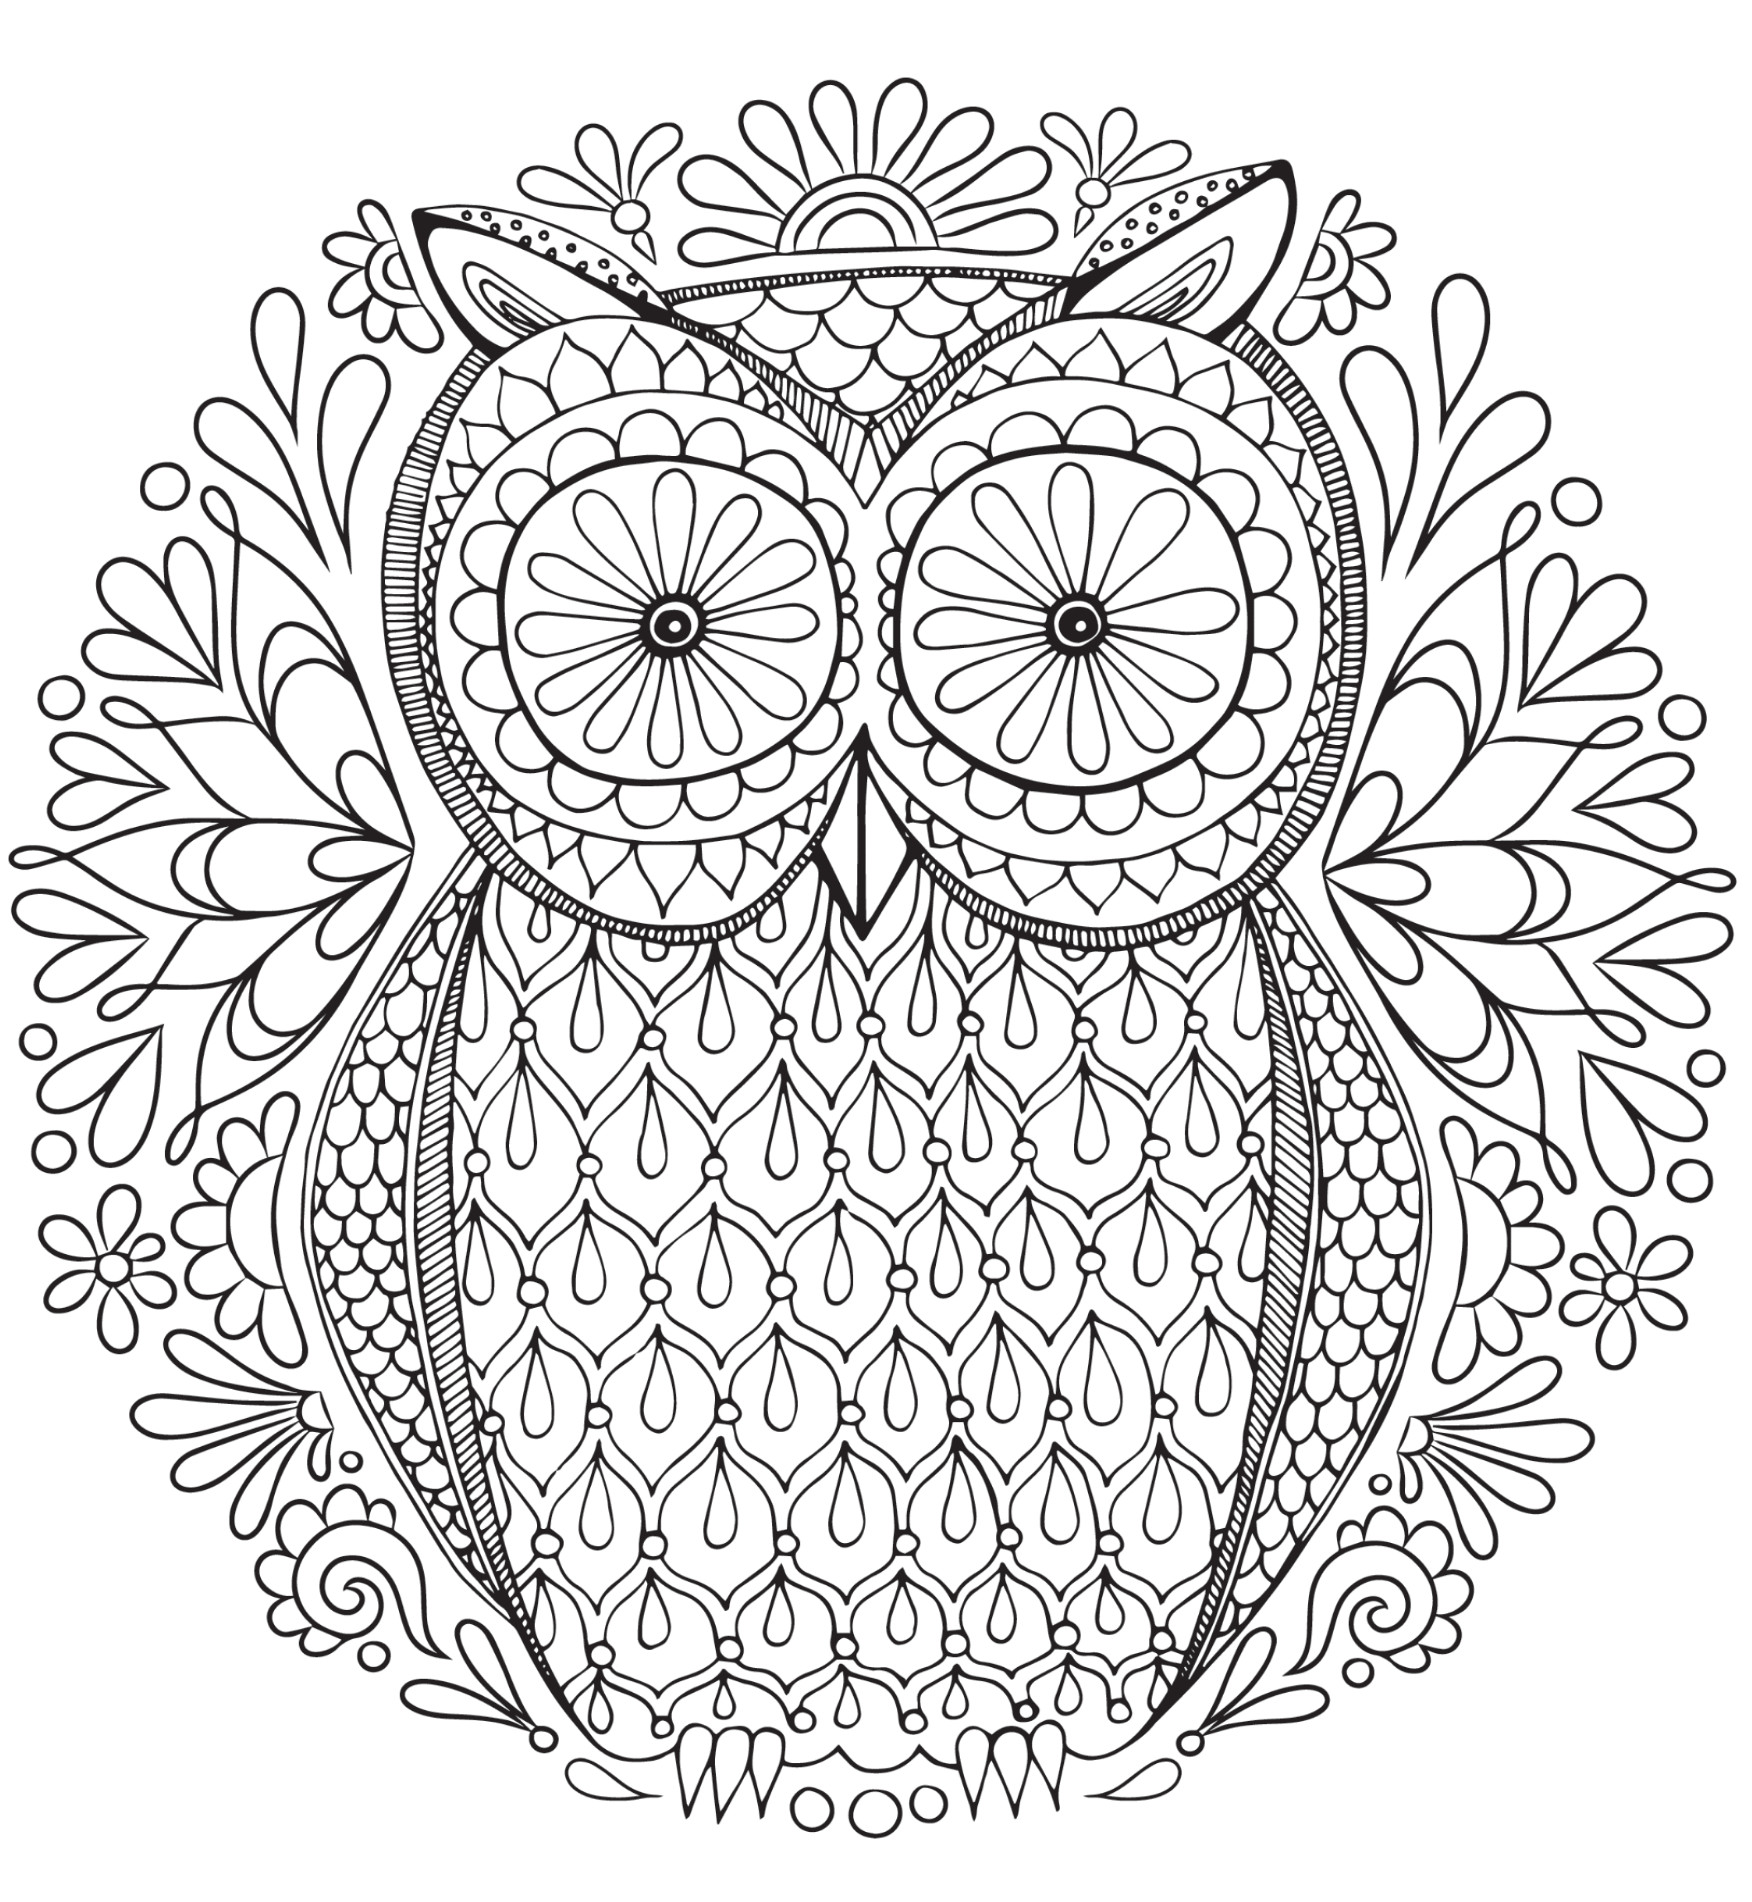 Printable Coloring Pages Adults
 20 Free Adult Colouring Pages The Organised Housewife